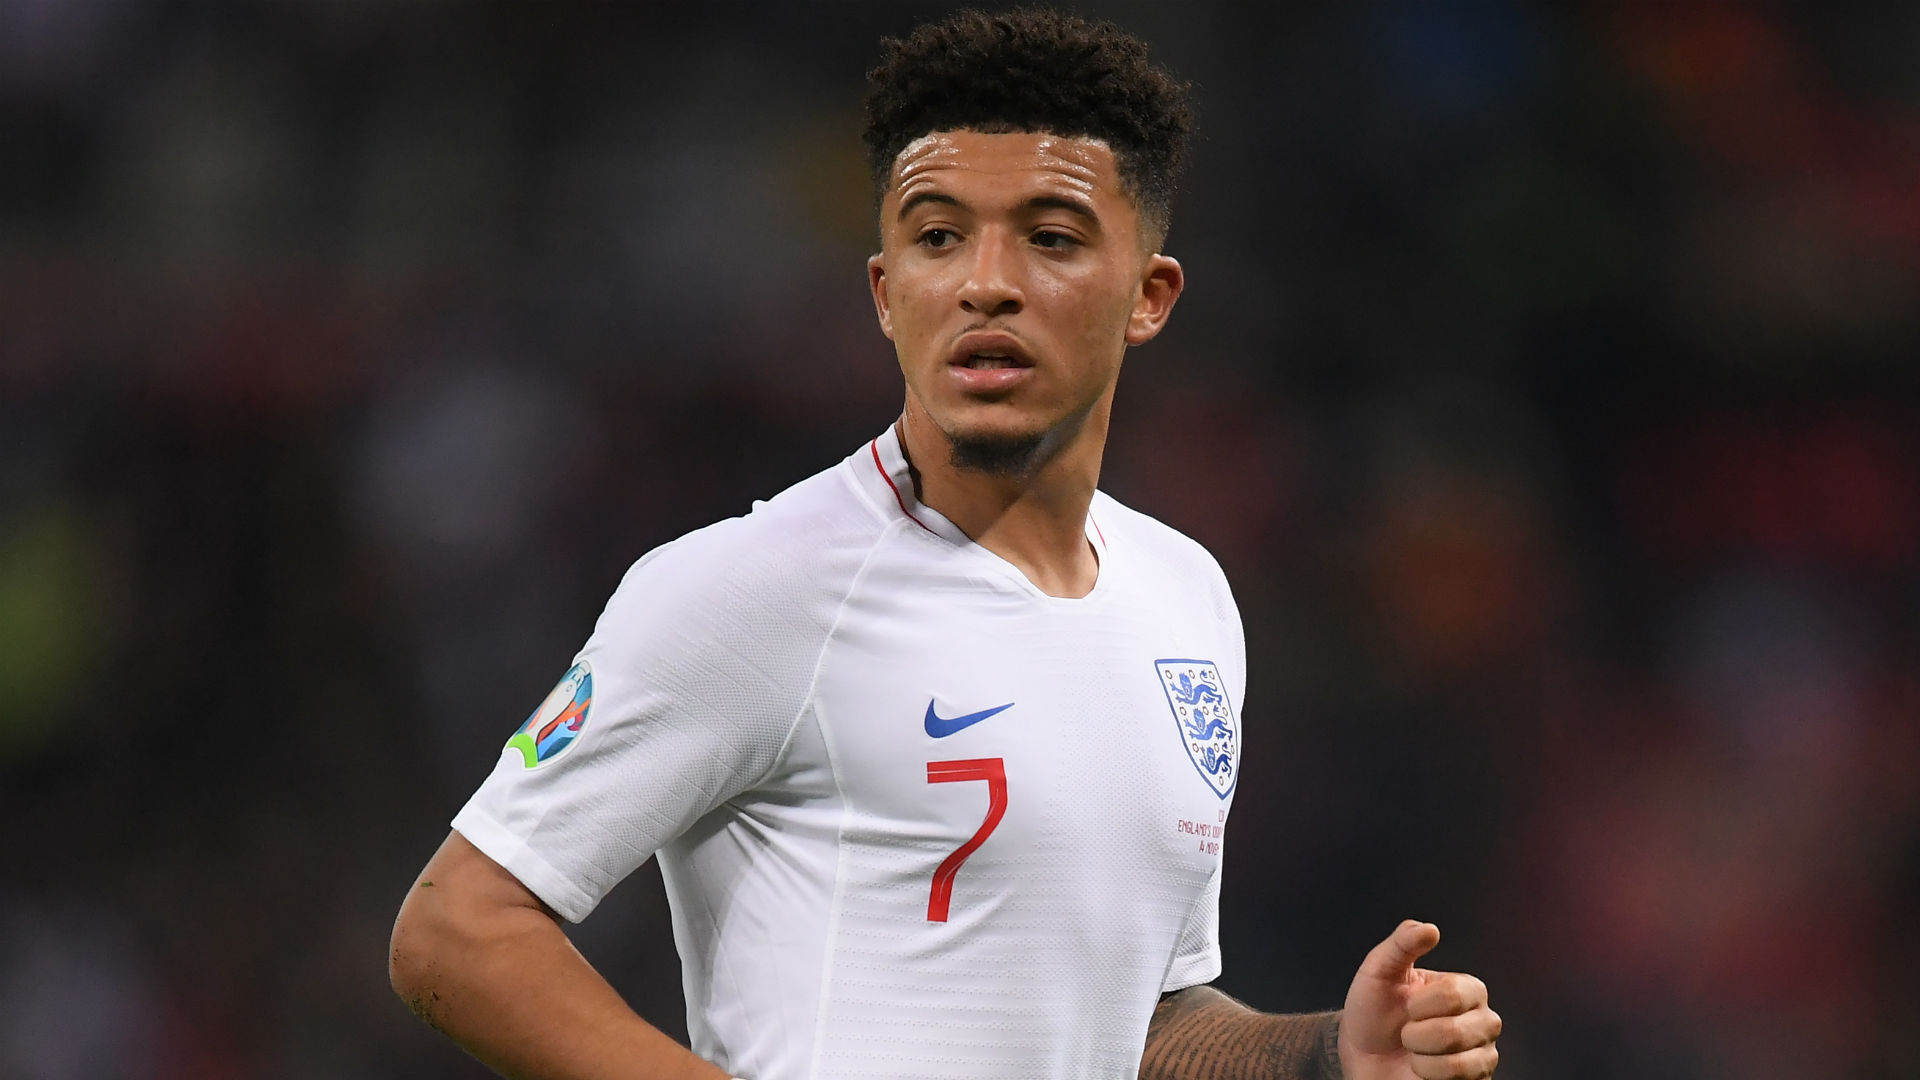 Jurgen Klopp has suggested links of Liverpool approaching his former club Borussia Dortmund for Jadon Sancho are wide of the mark.